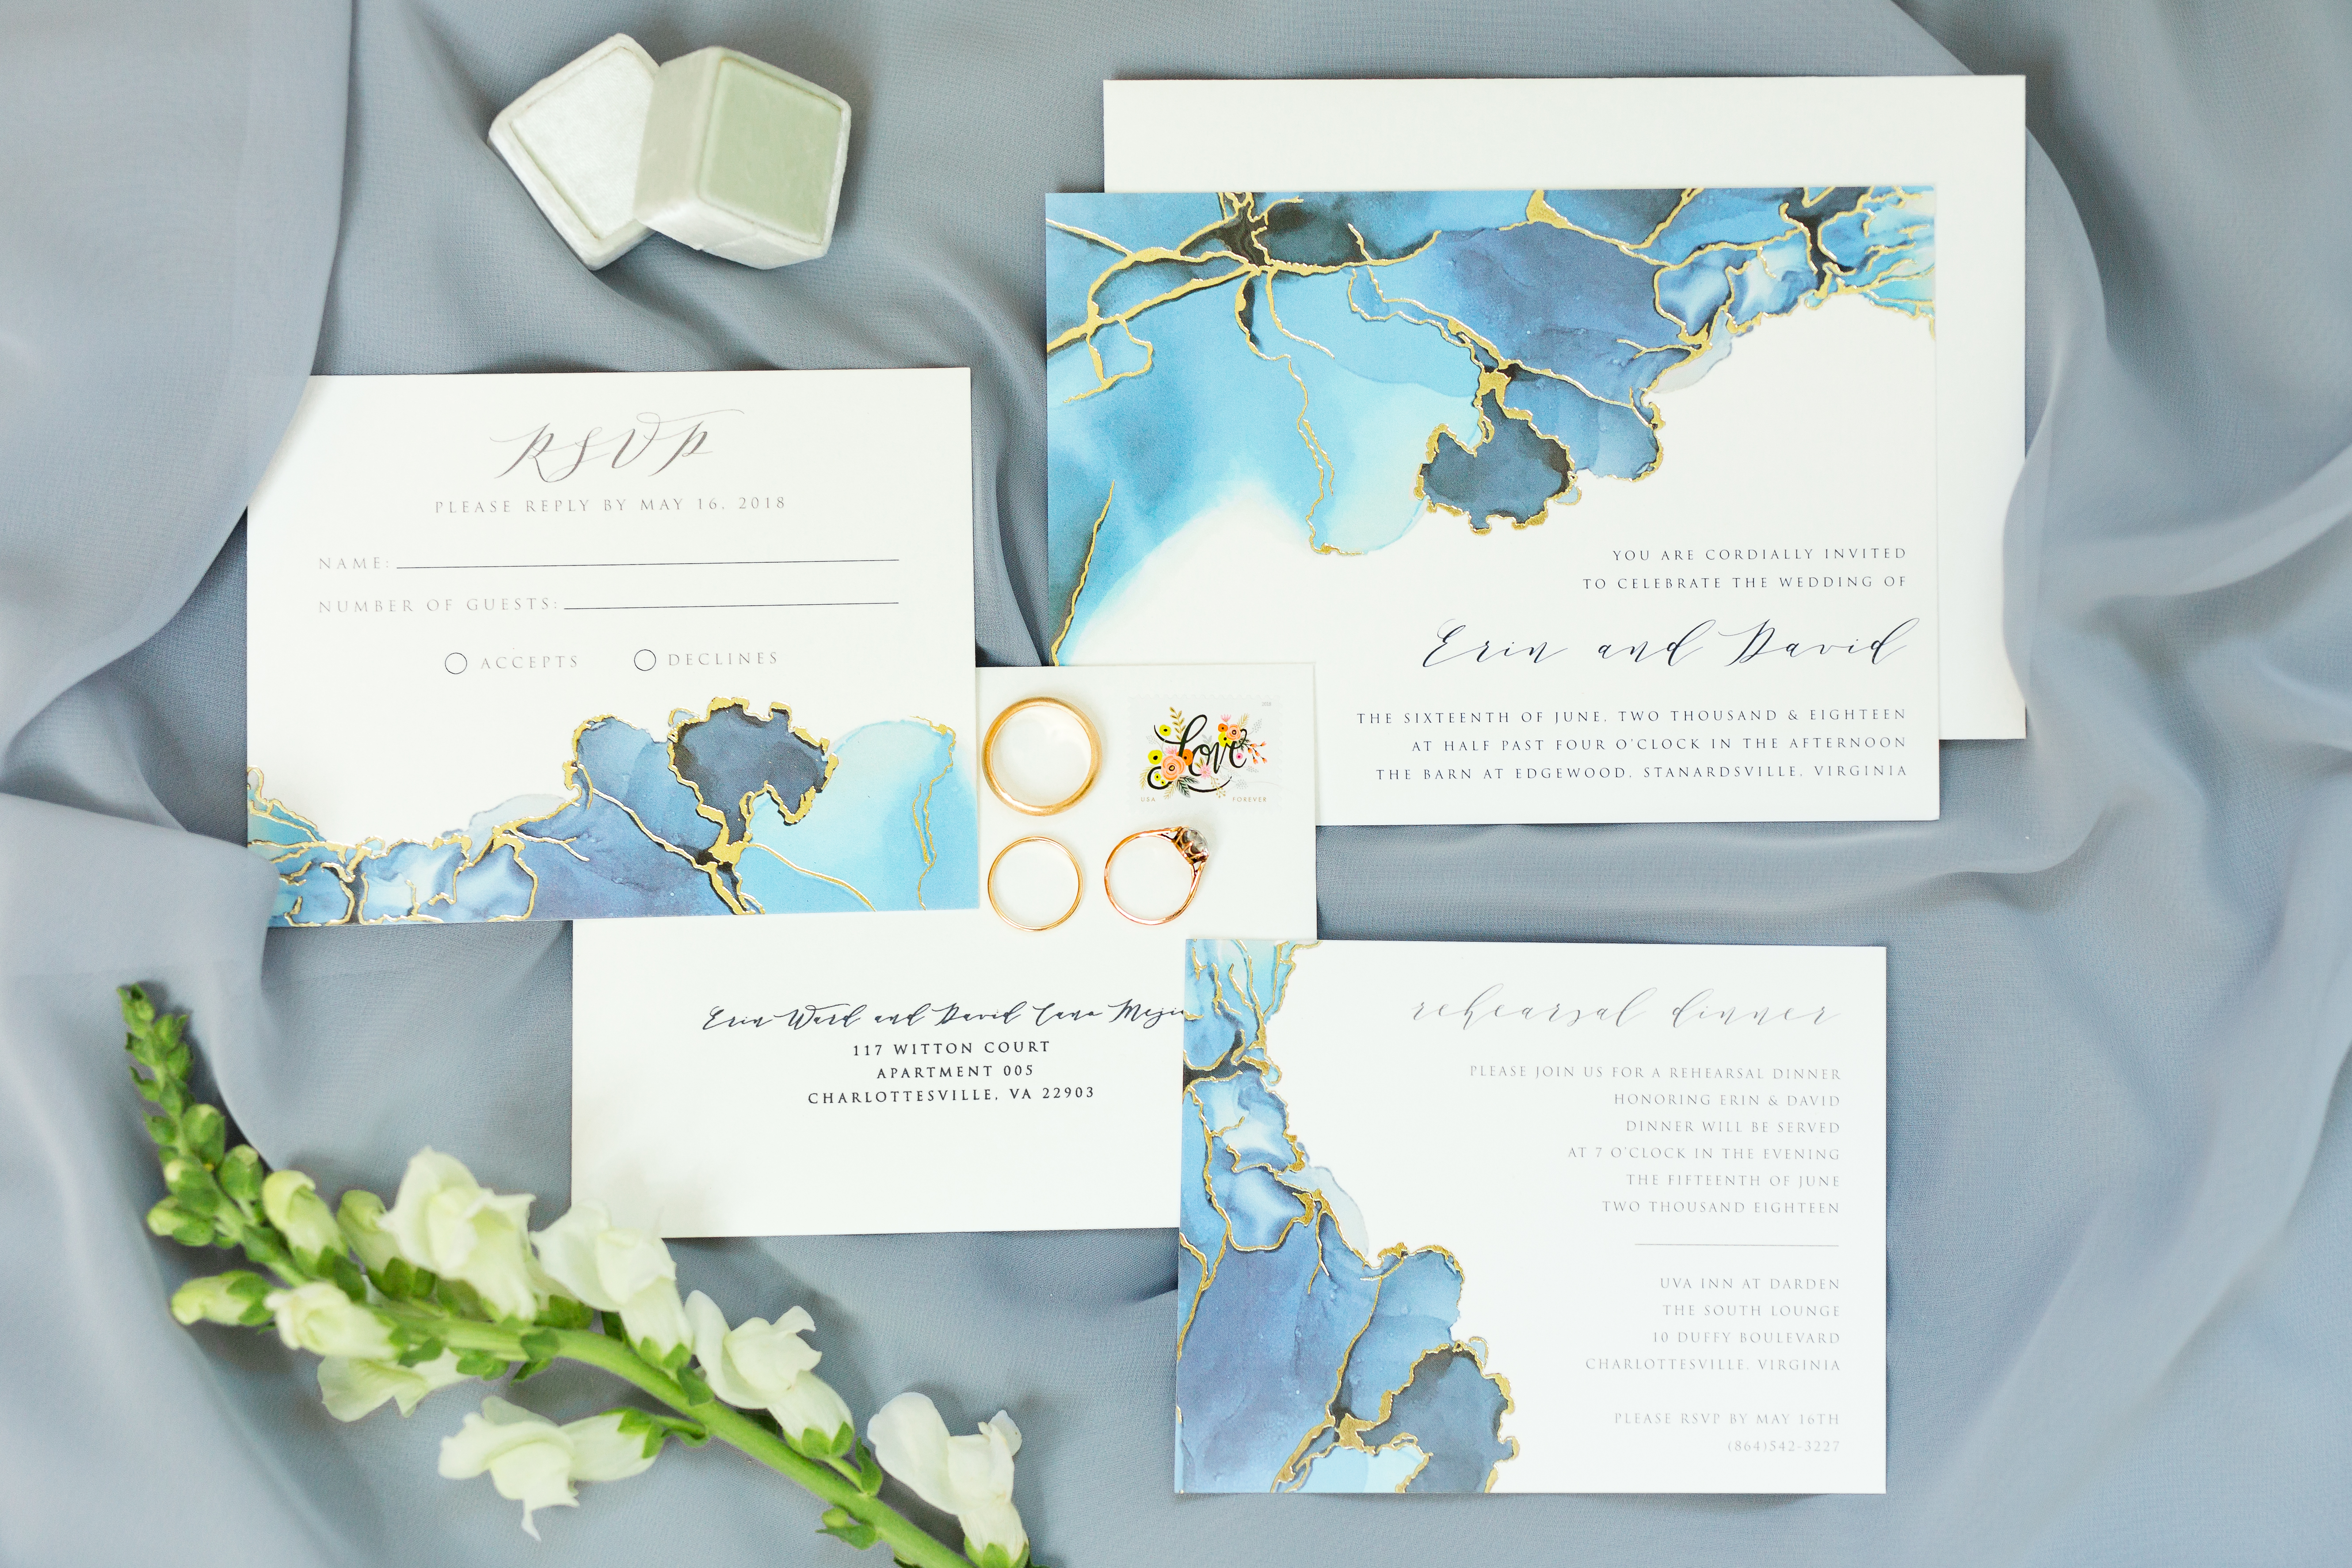 Blue, Green and Gold foiled invitation suite with a mrs box and an engagement ring against a grayish blue bridesmaid dress